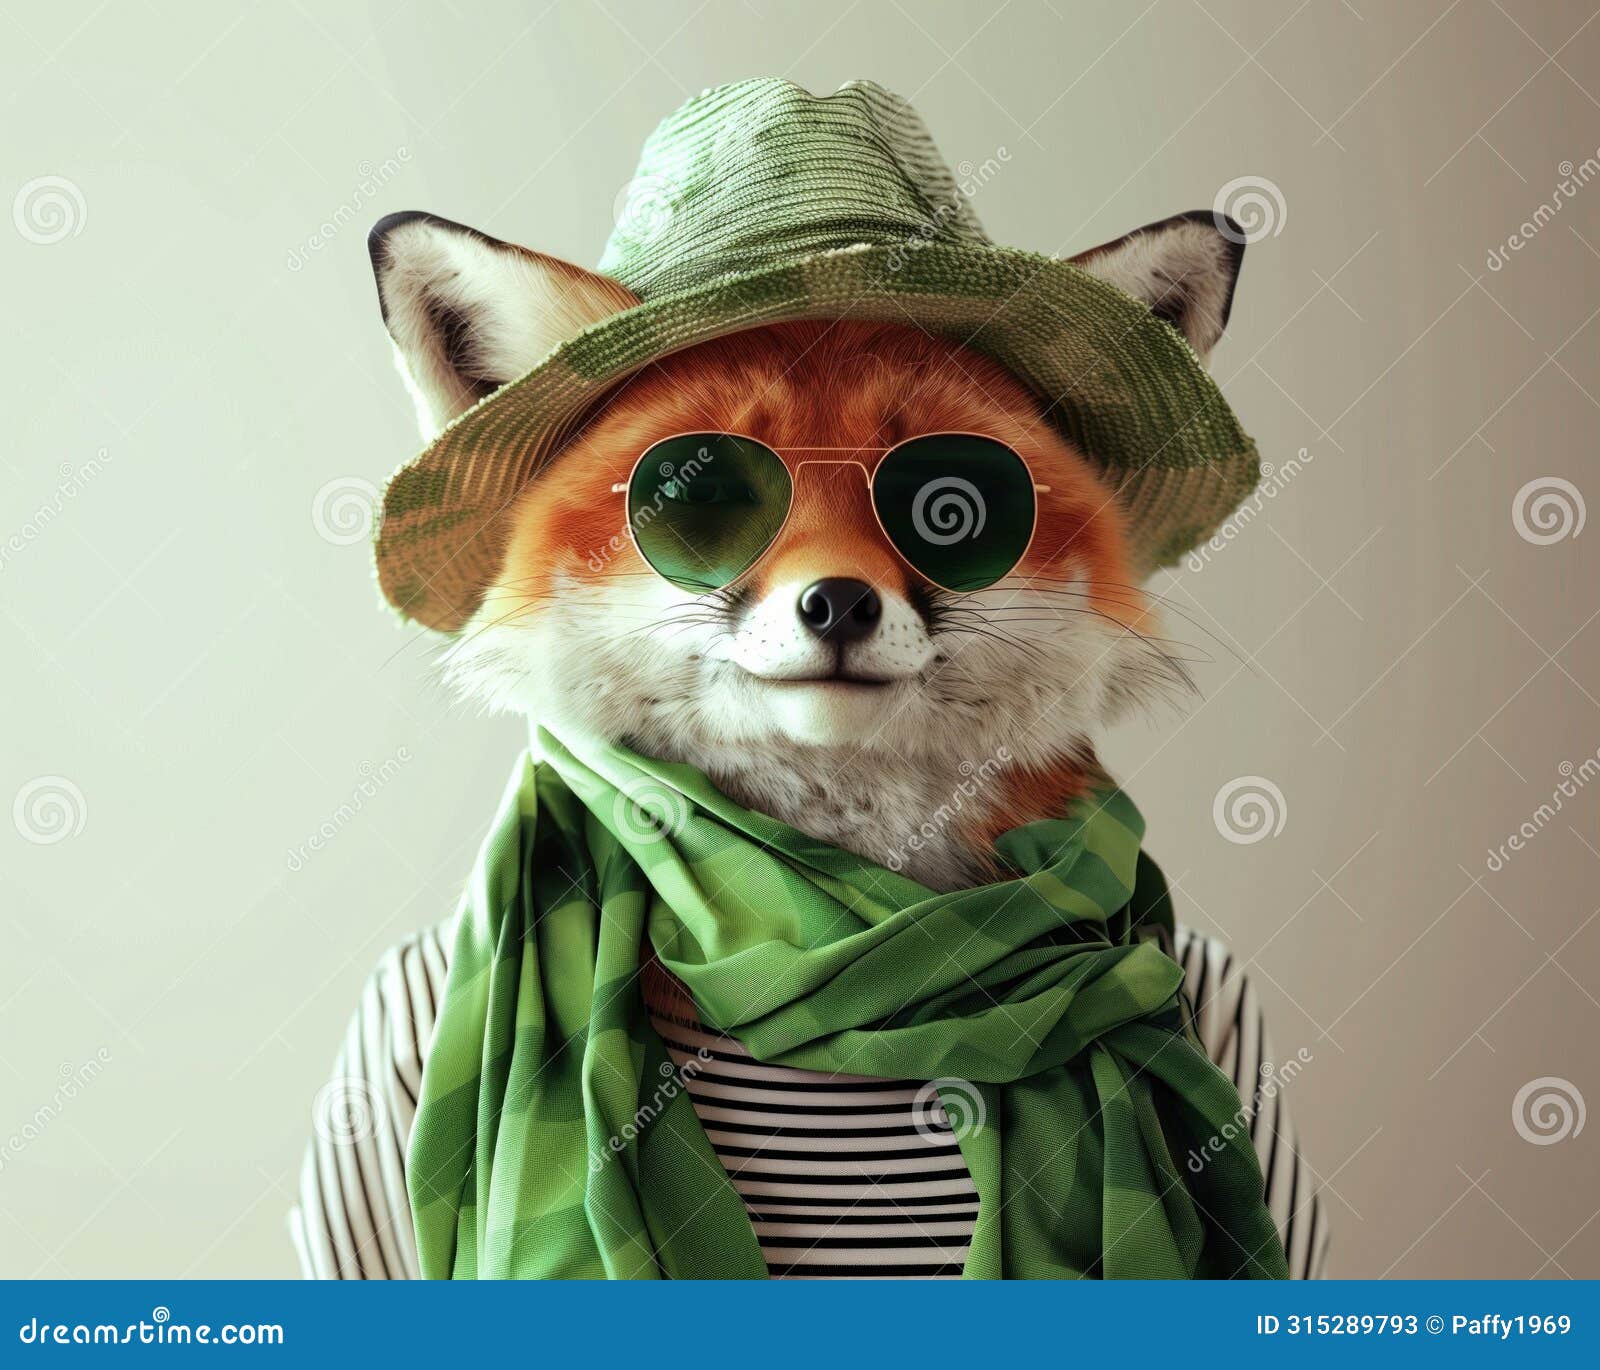 fashionable fox with sunglasses and hat, concept of style and humor.